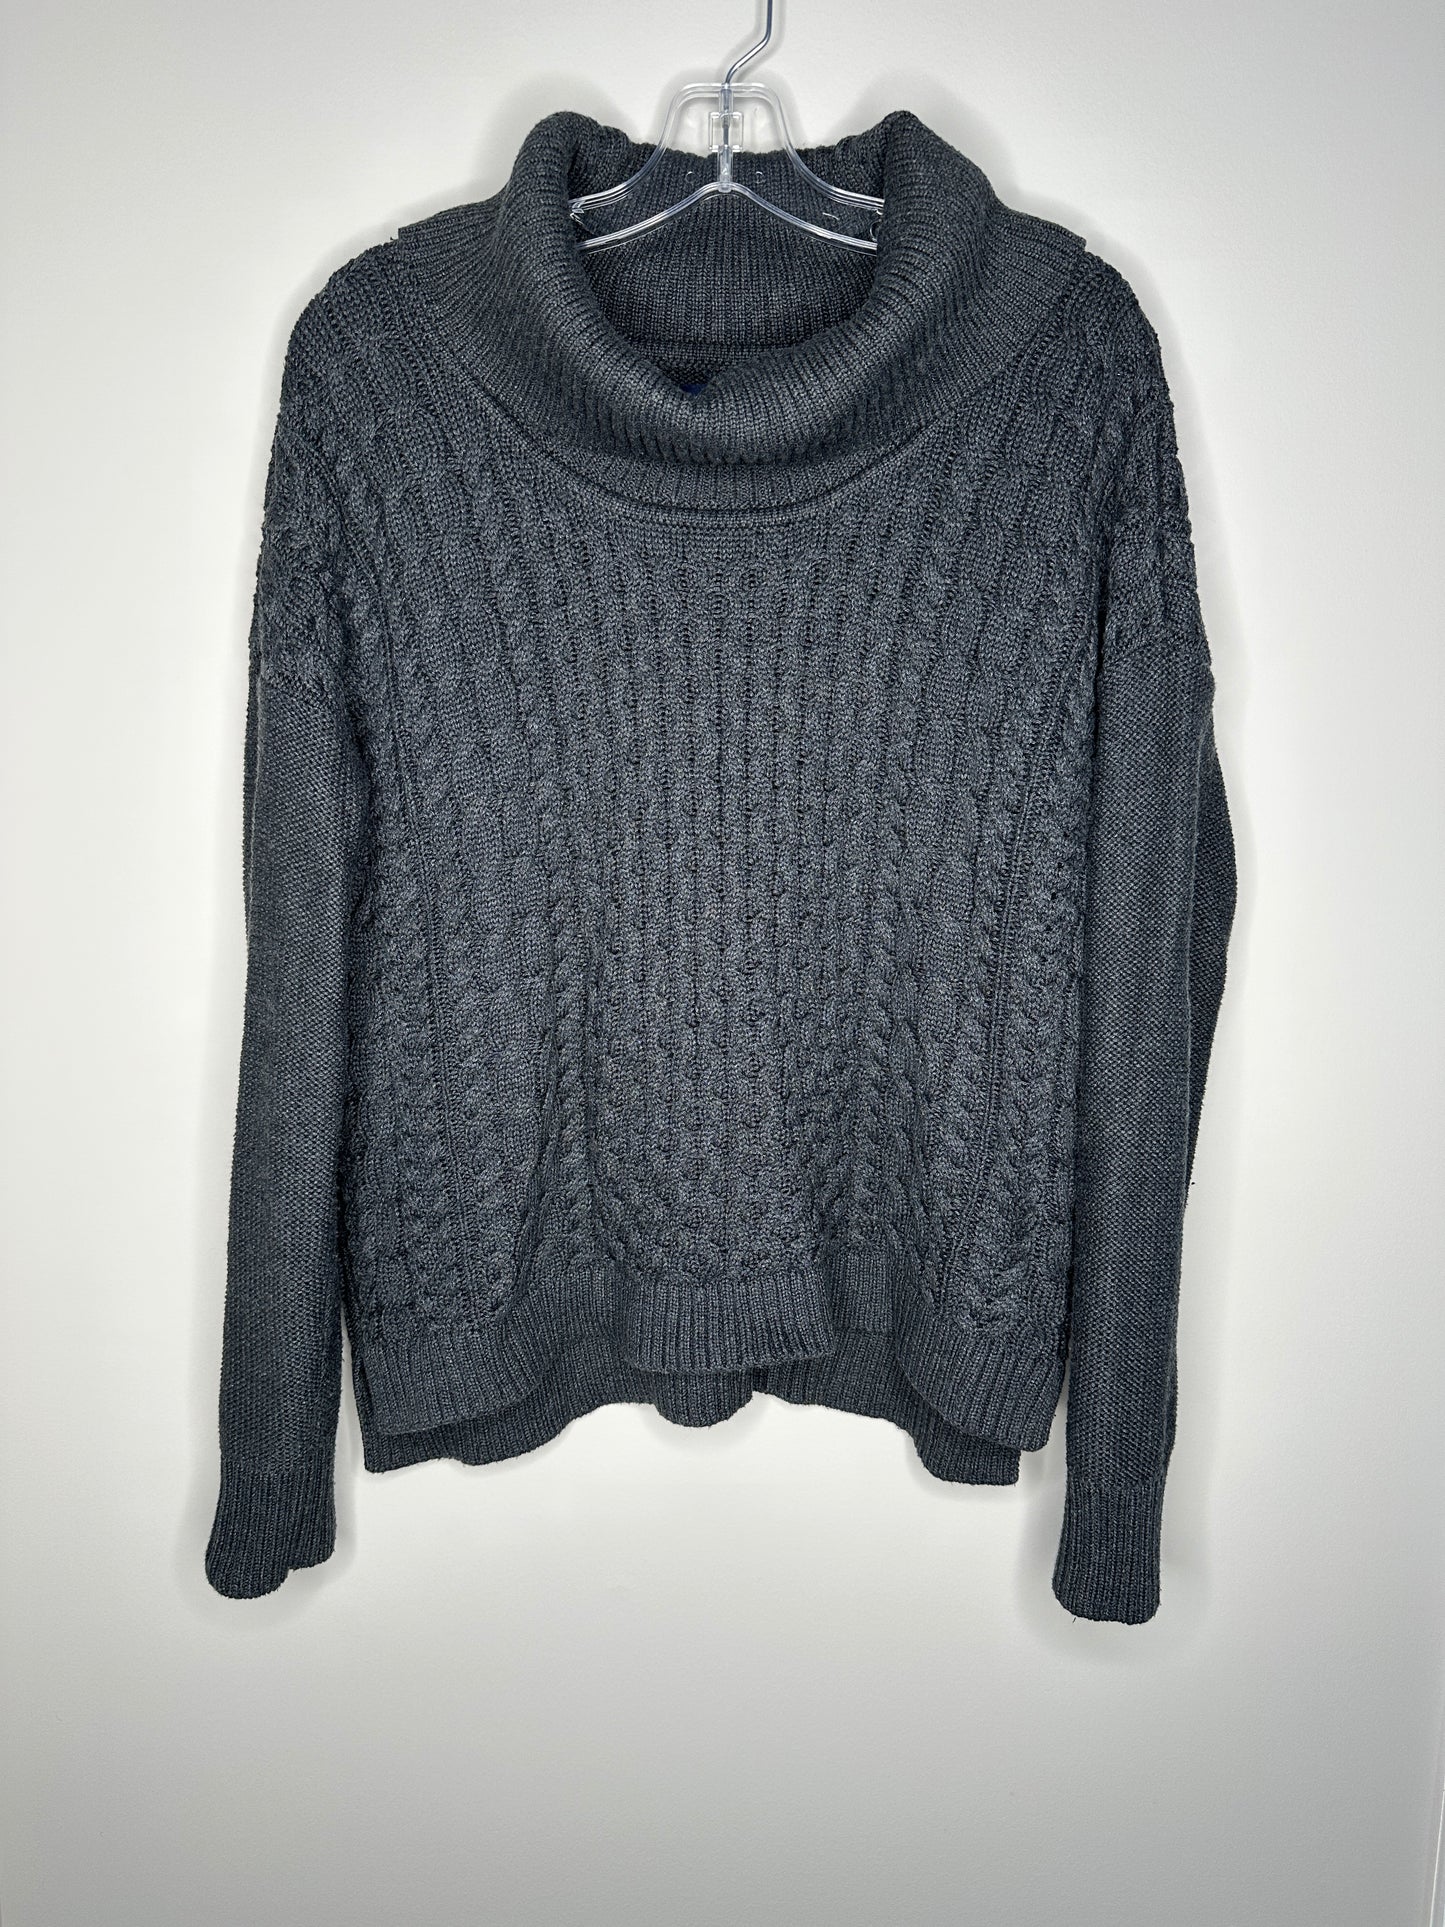 American Eagle Size L Gray Cable Knit Cowl-Neck Sweater